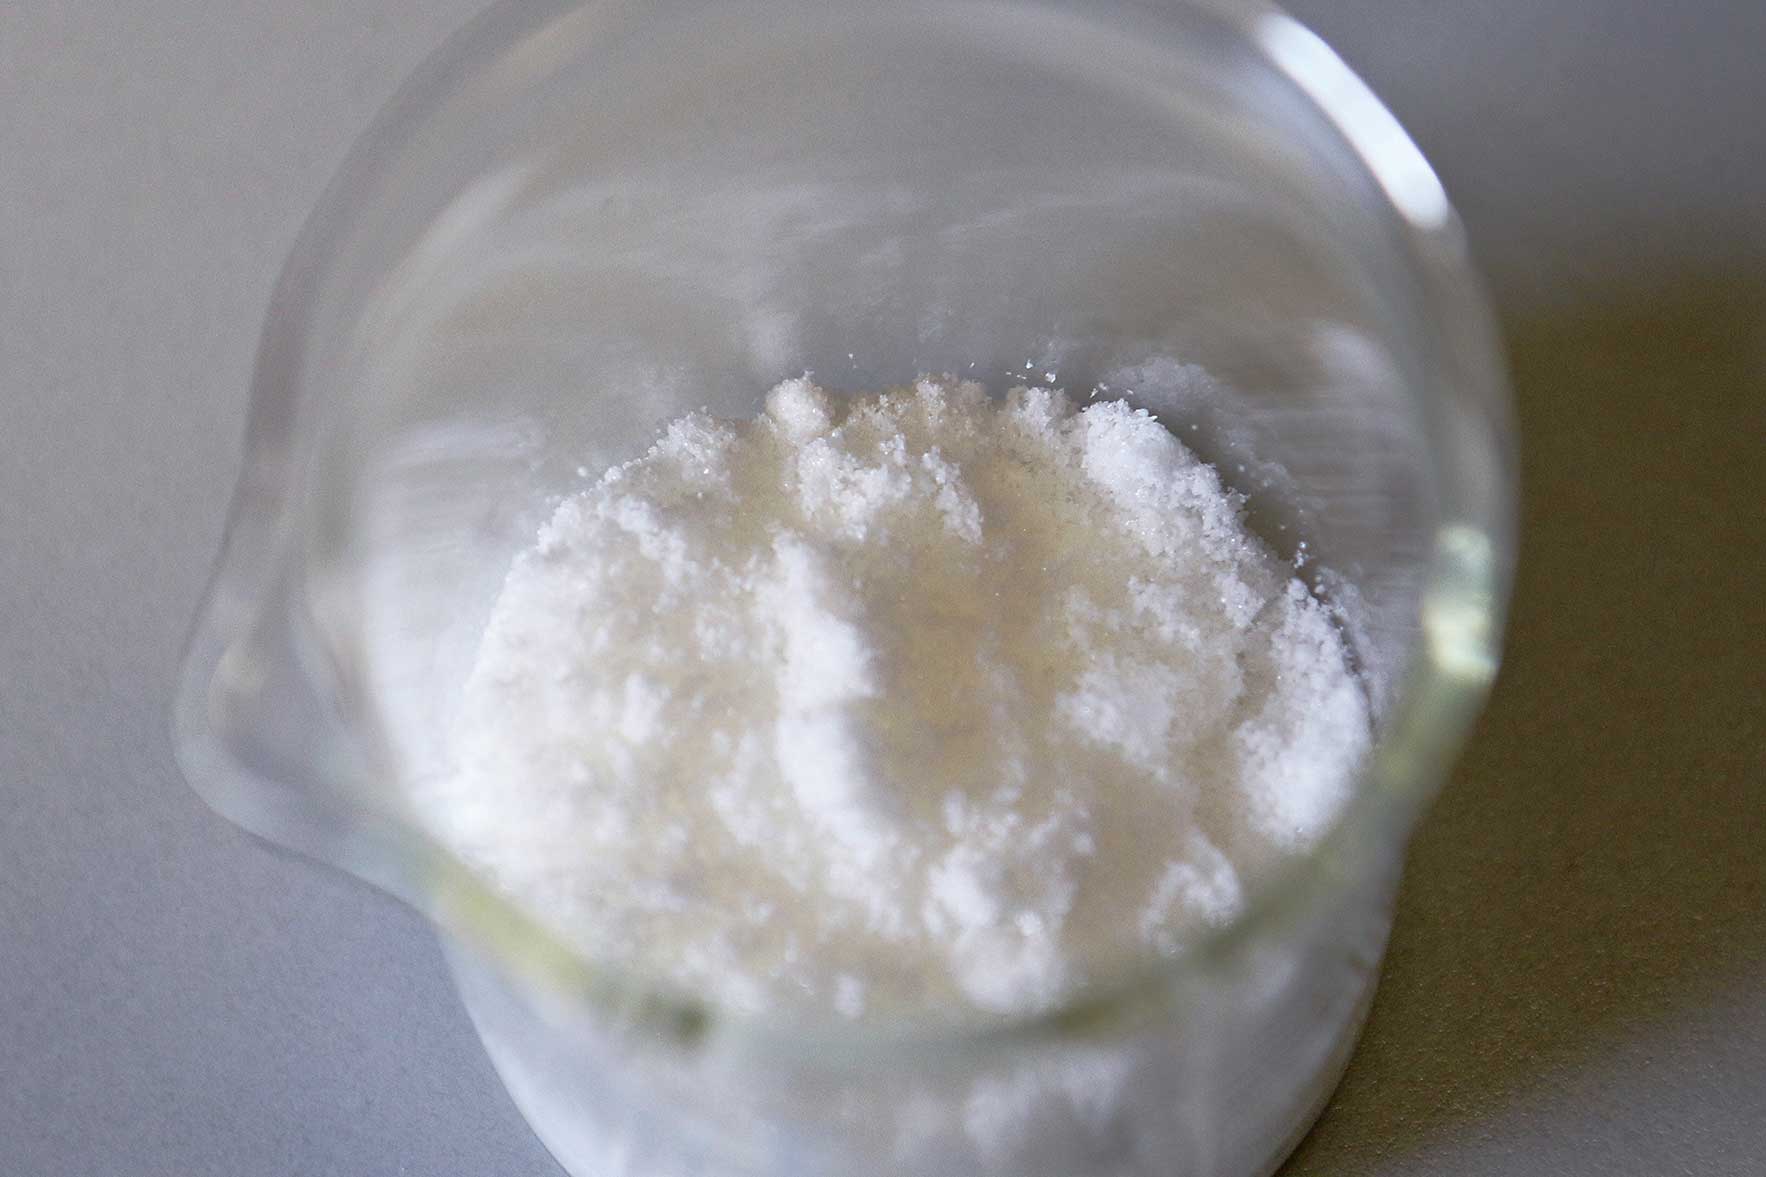 The photo shows a laboratory jar containing a white powder.